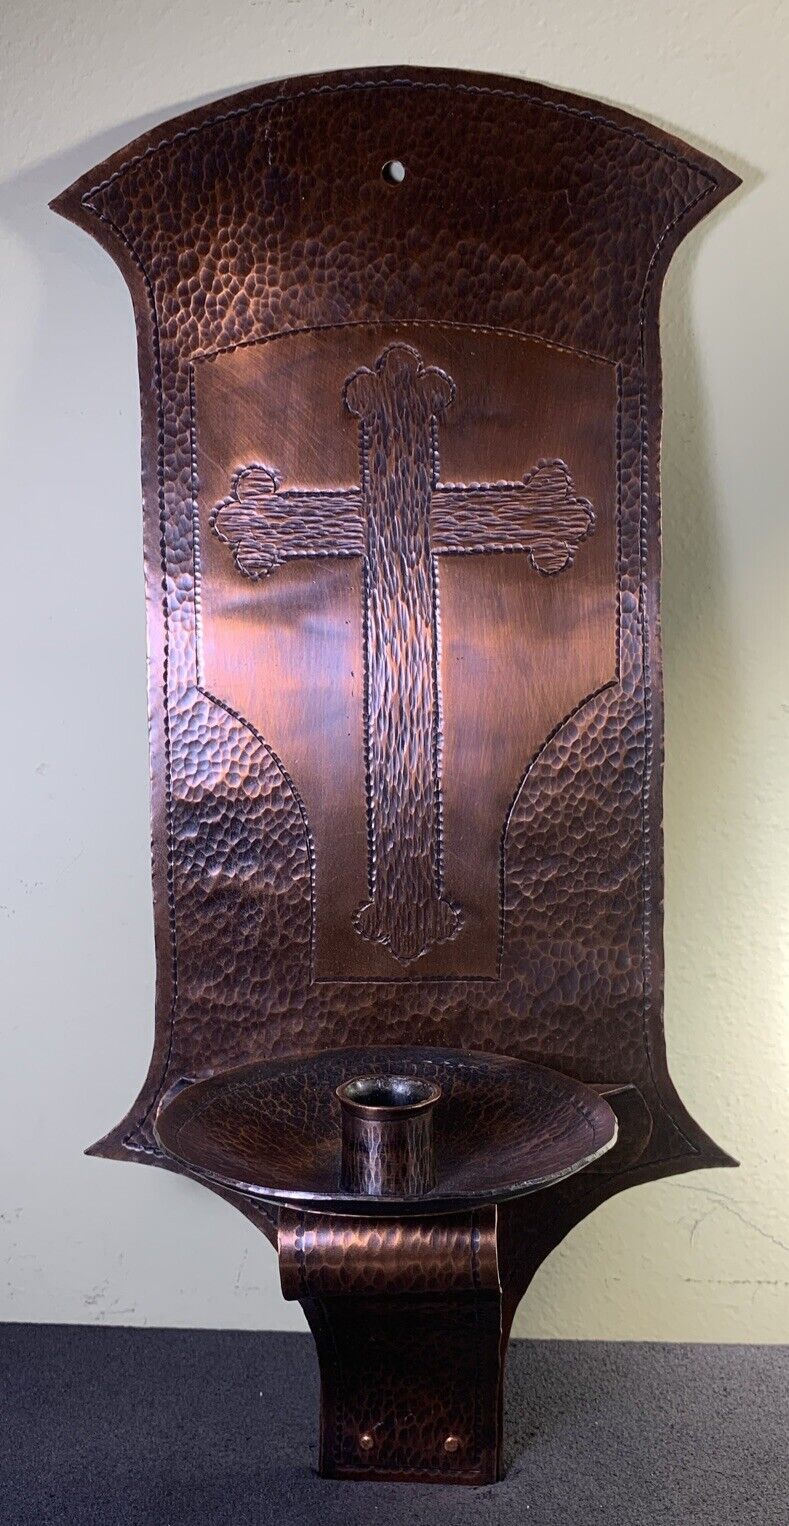 John Monk Hammered Copper Wall Sconce, Arts & Crafts Roycrofters At Large Assoc.